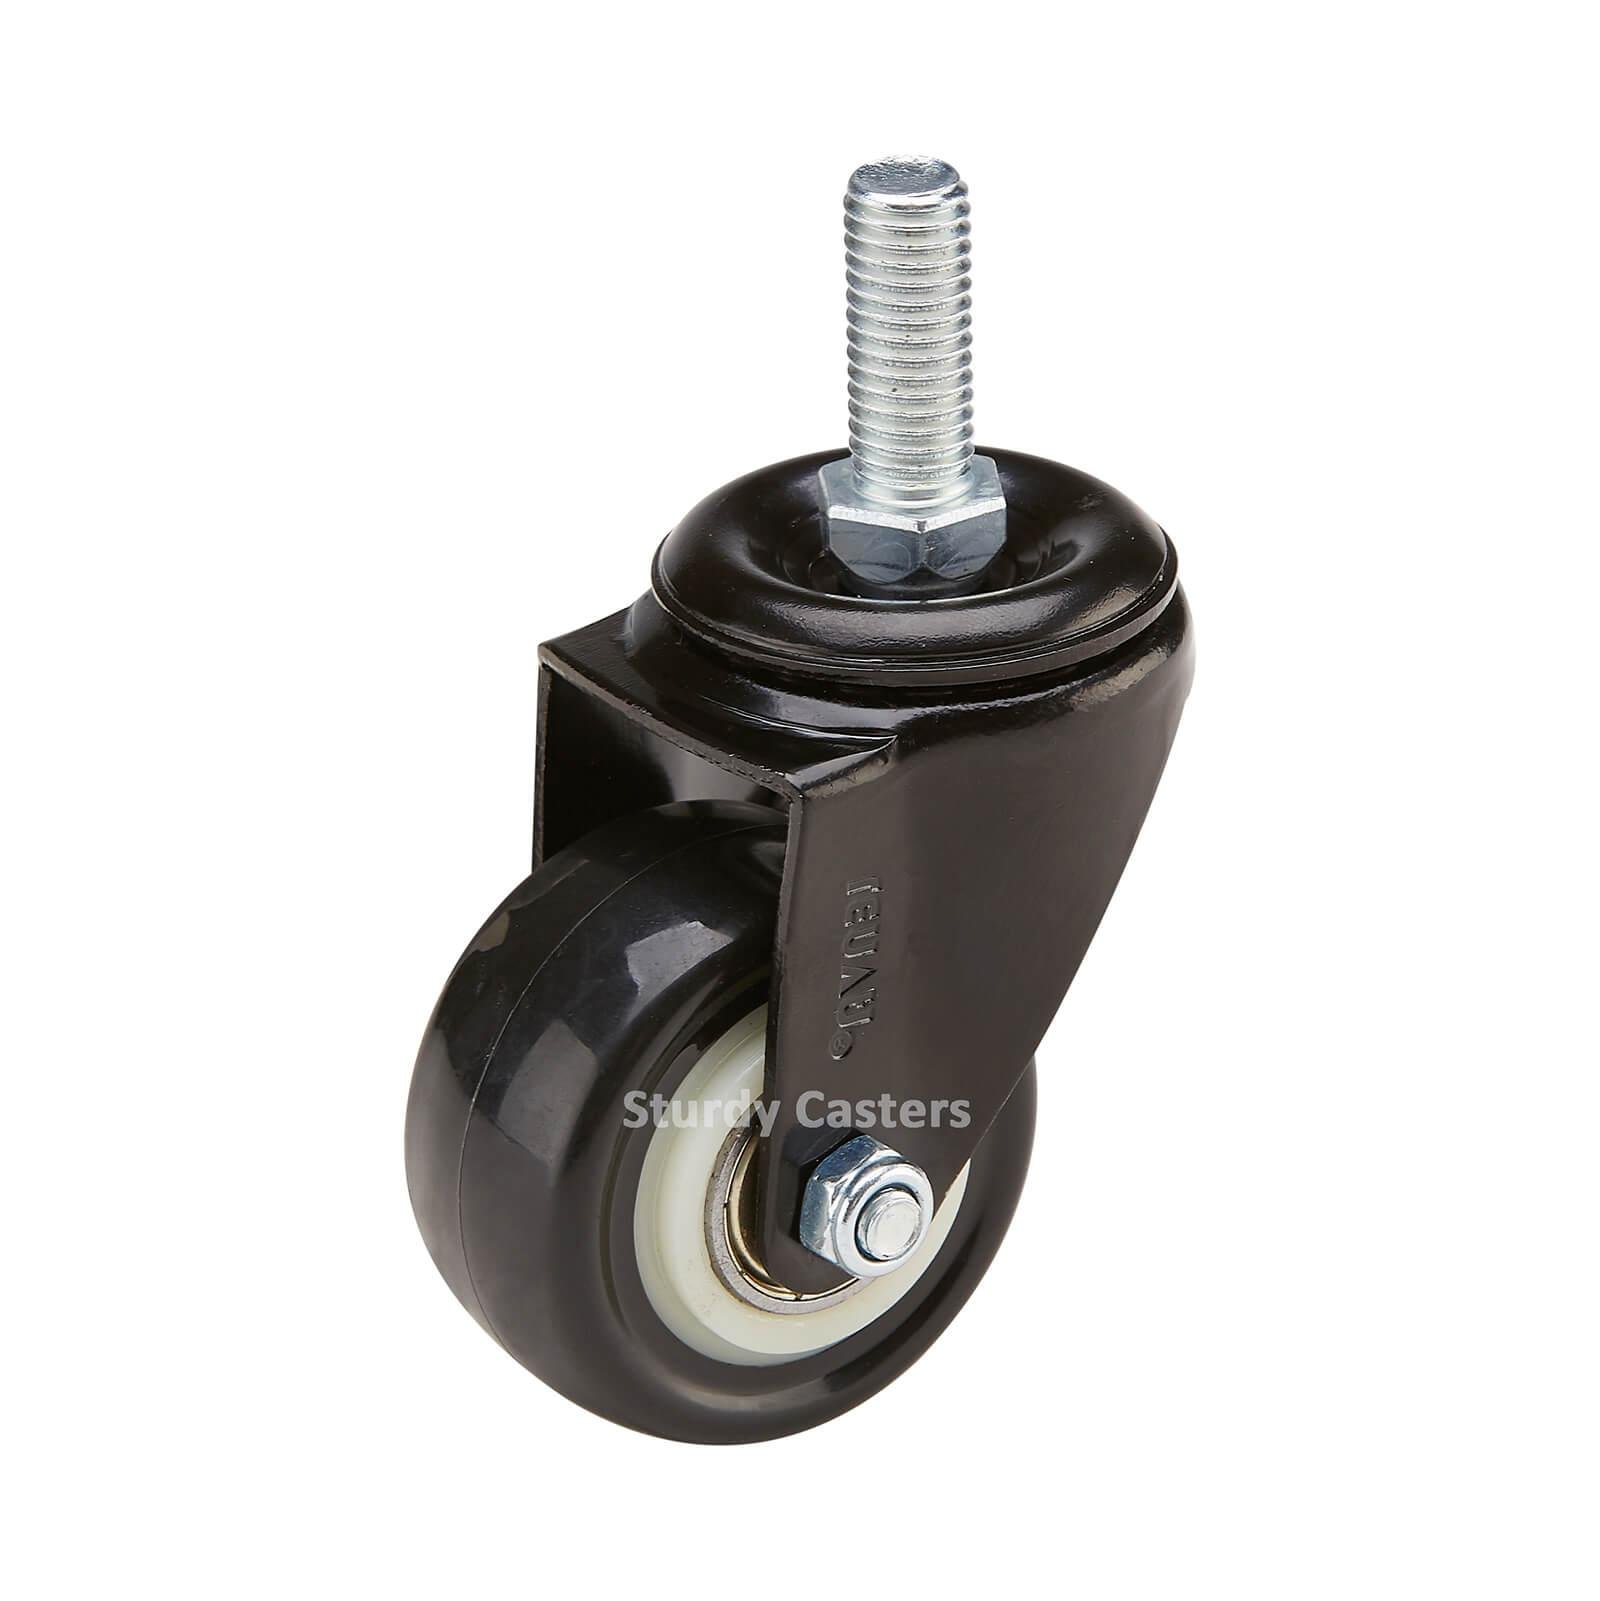 Stool Casters Stem Design with Polyurethane Wheel for High Loads